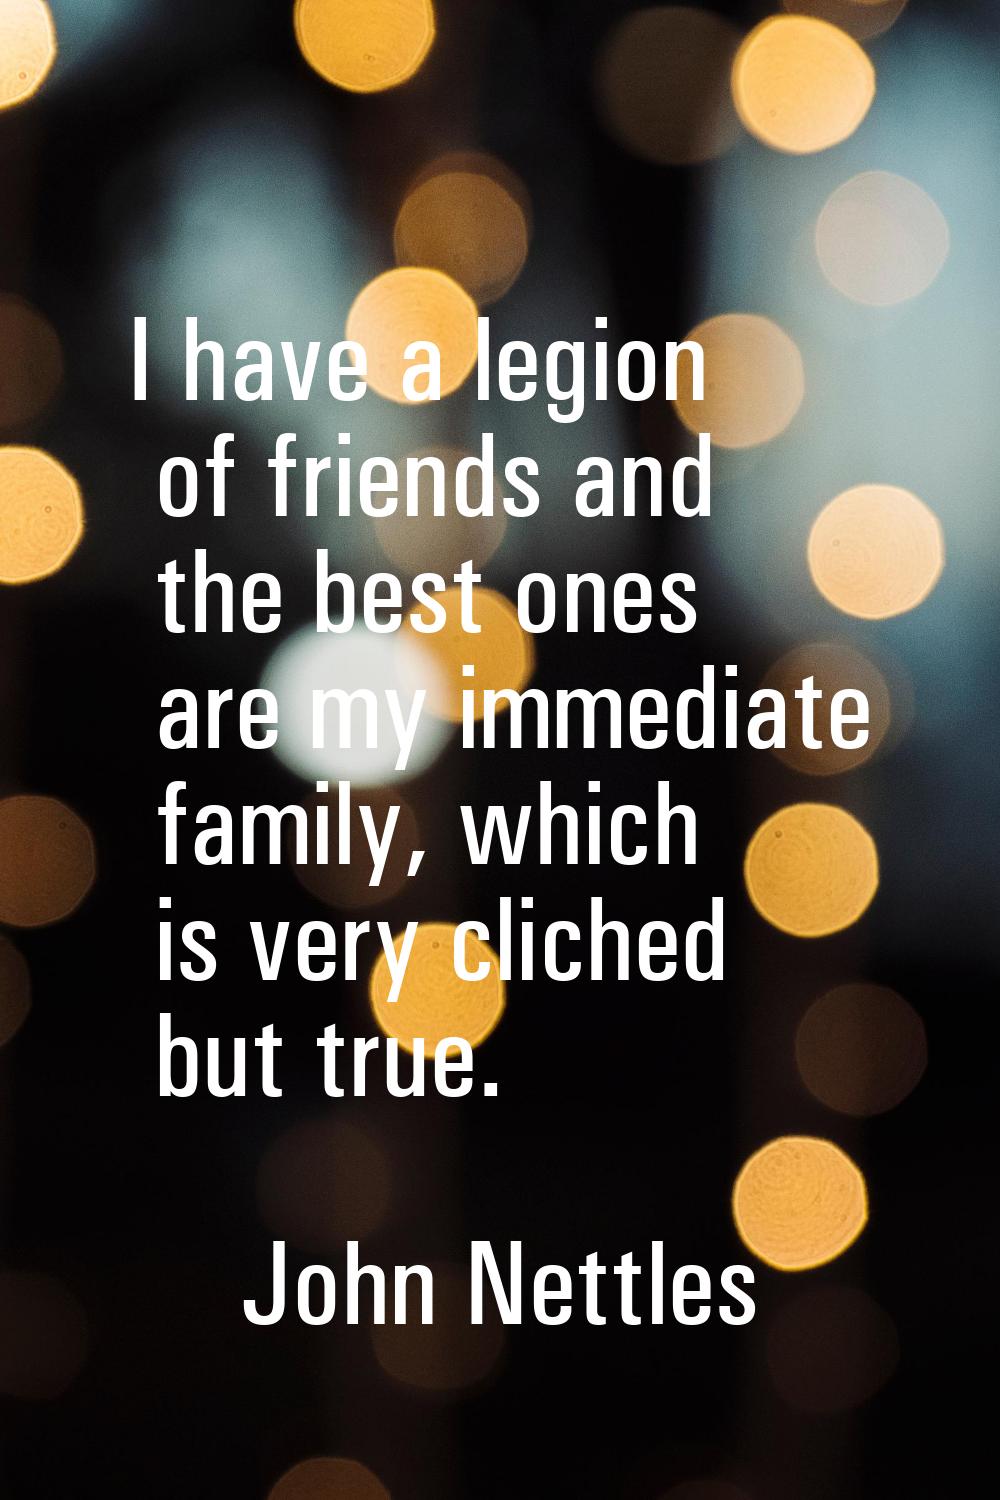 I have a legion of friends and the best ones are my immediate family, which is very cliched but tru